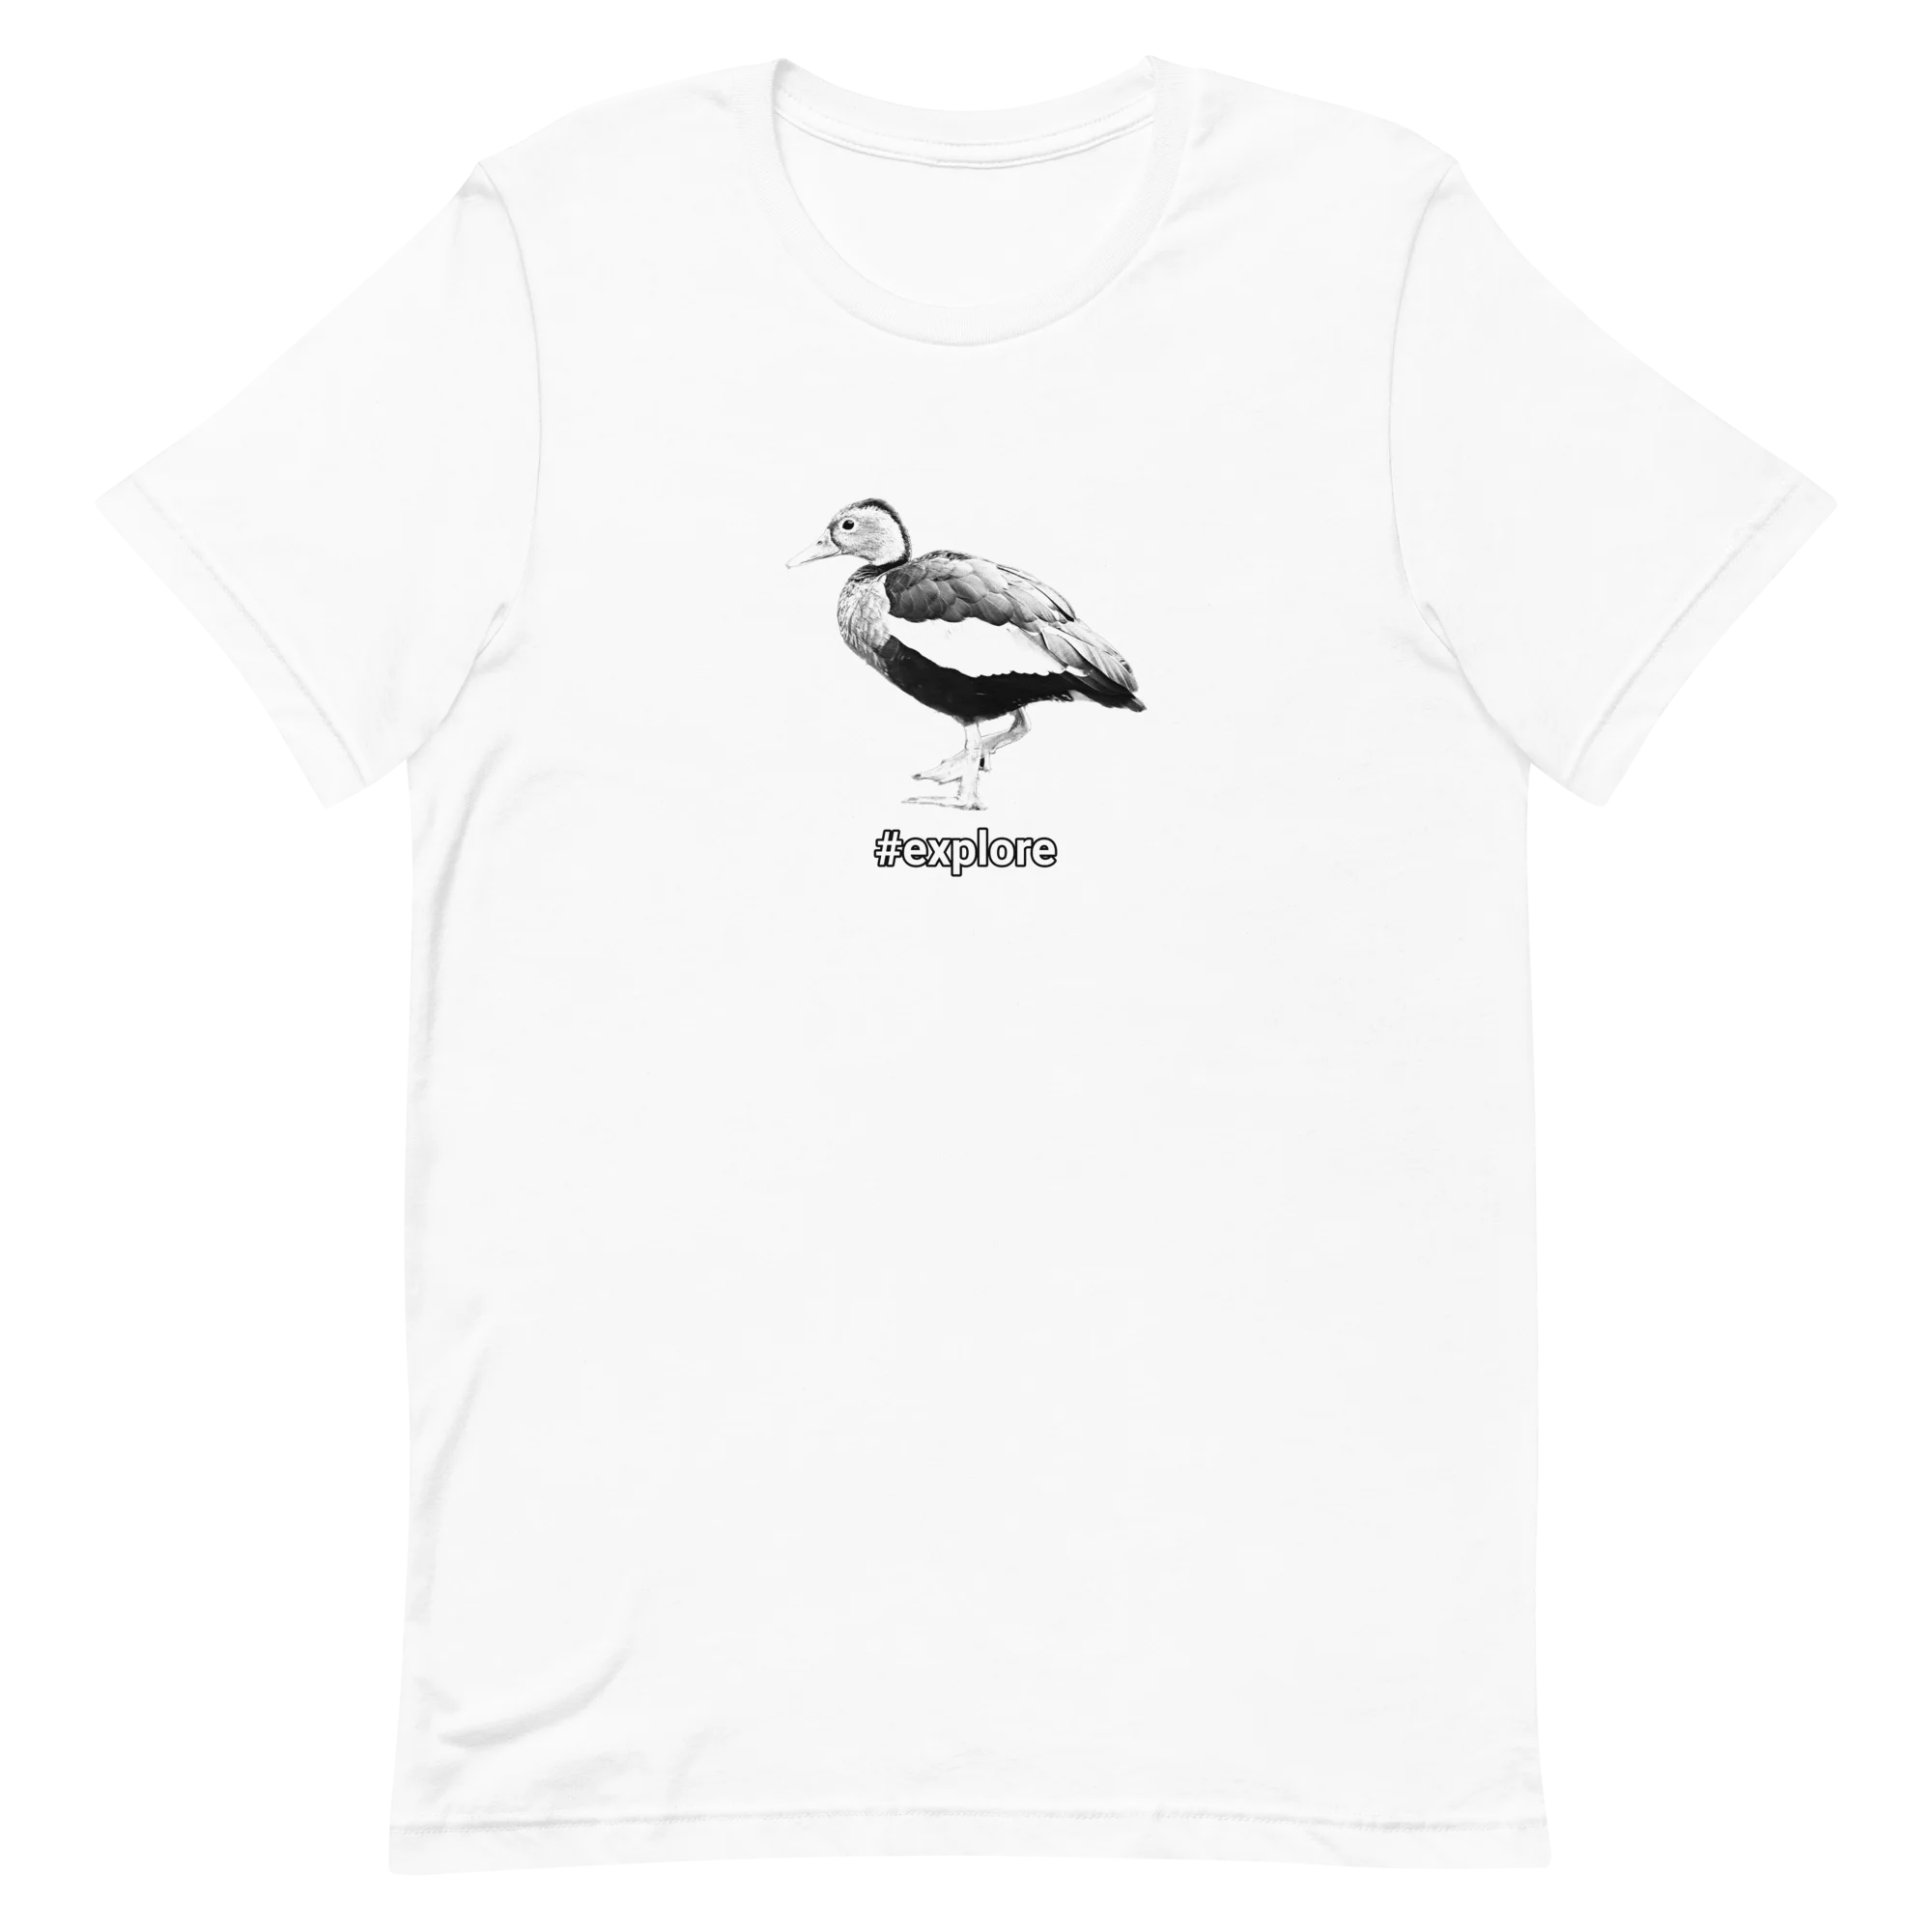 T-Shirt featuring an image of a duck